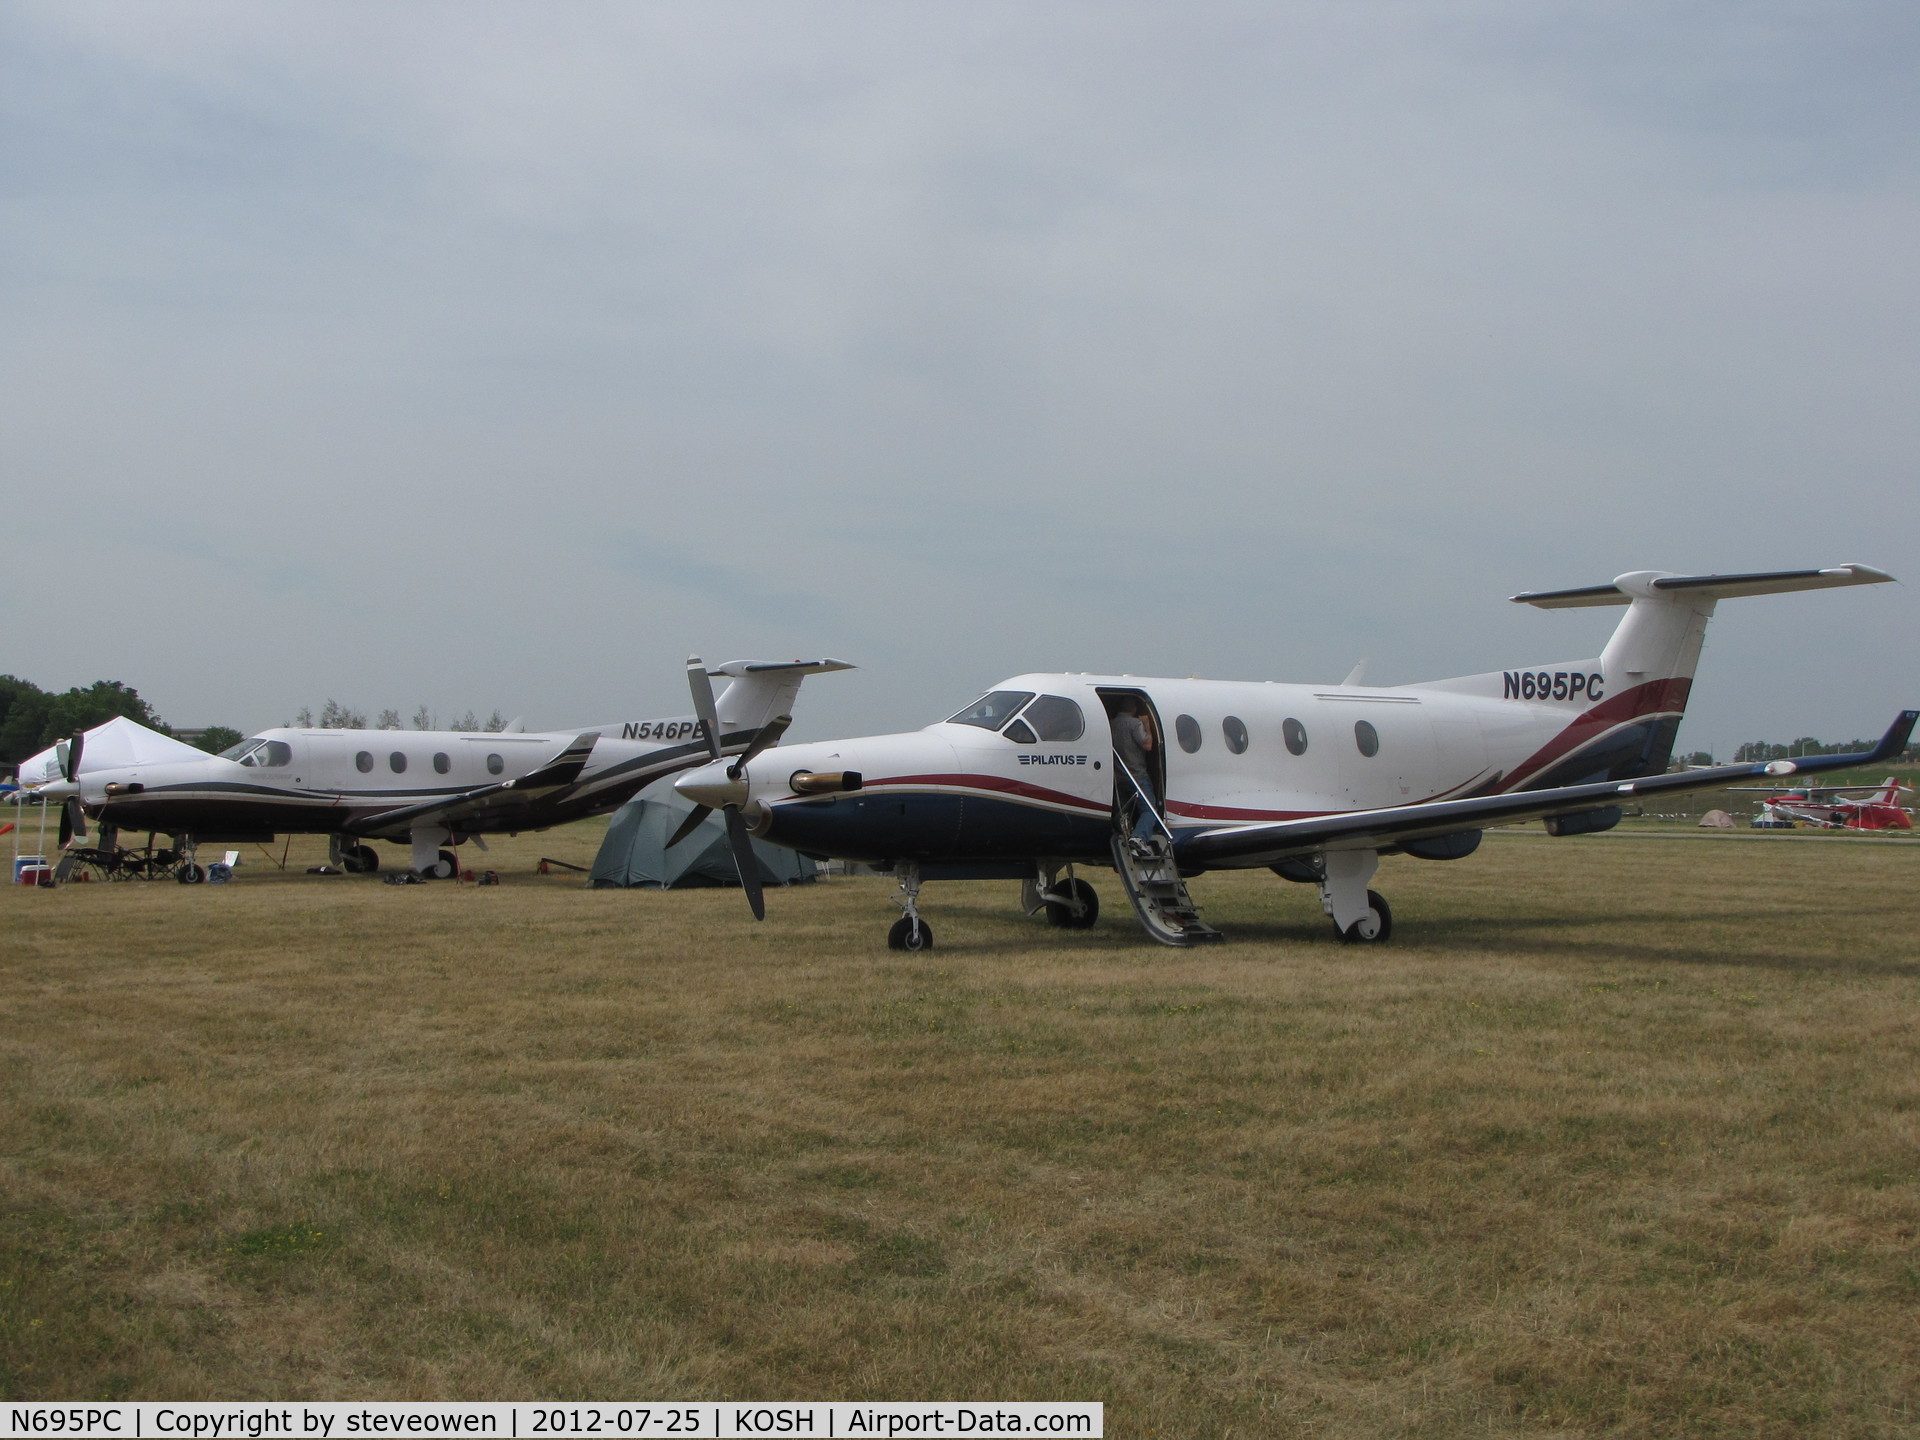 N695PC, 1999 Pilatus PC-12/45 C/N 305, In the camp grounds at EAA2012.N546PB in the back.